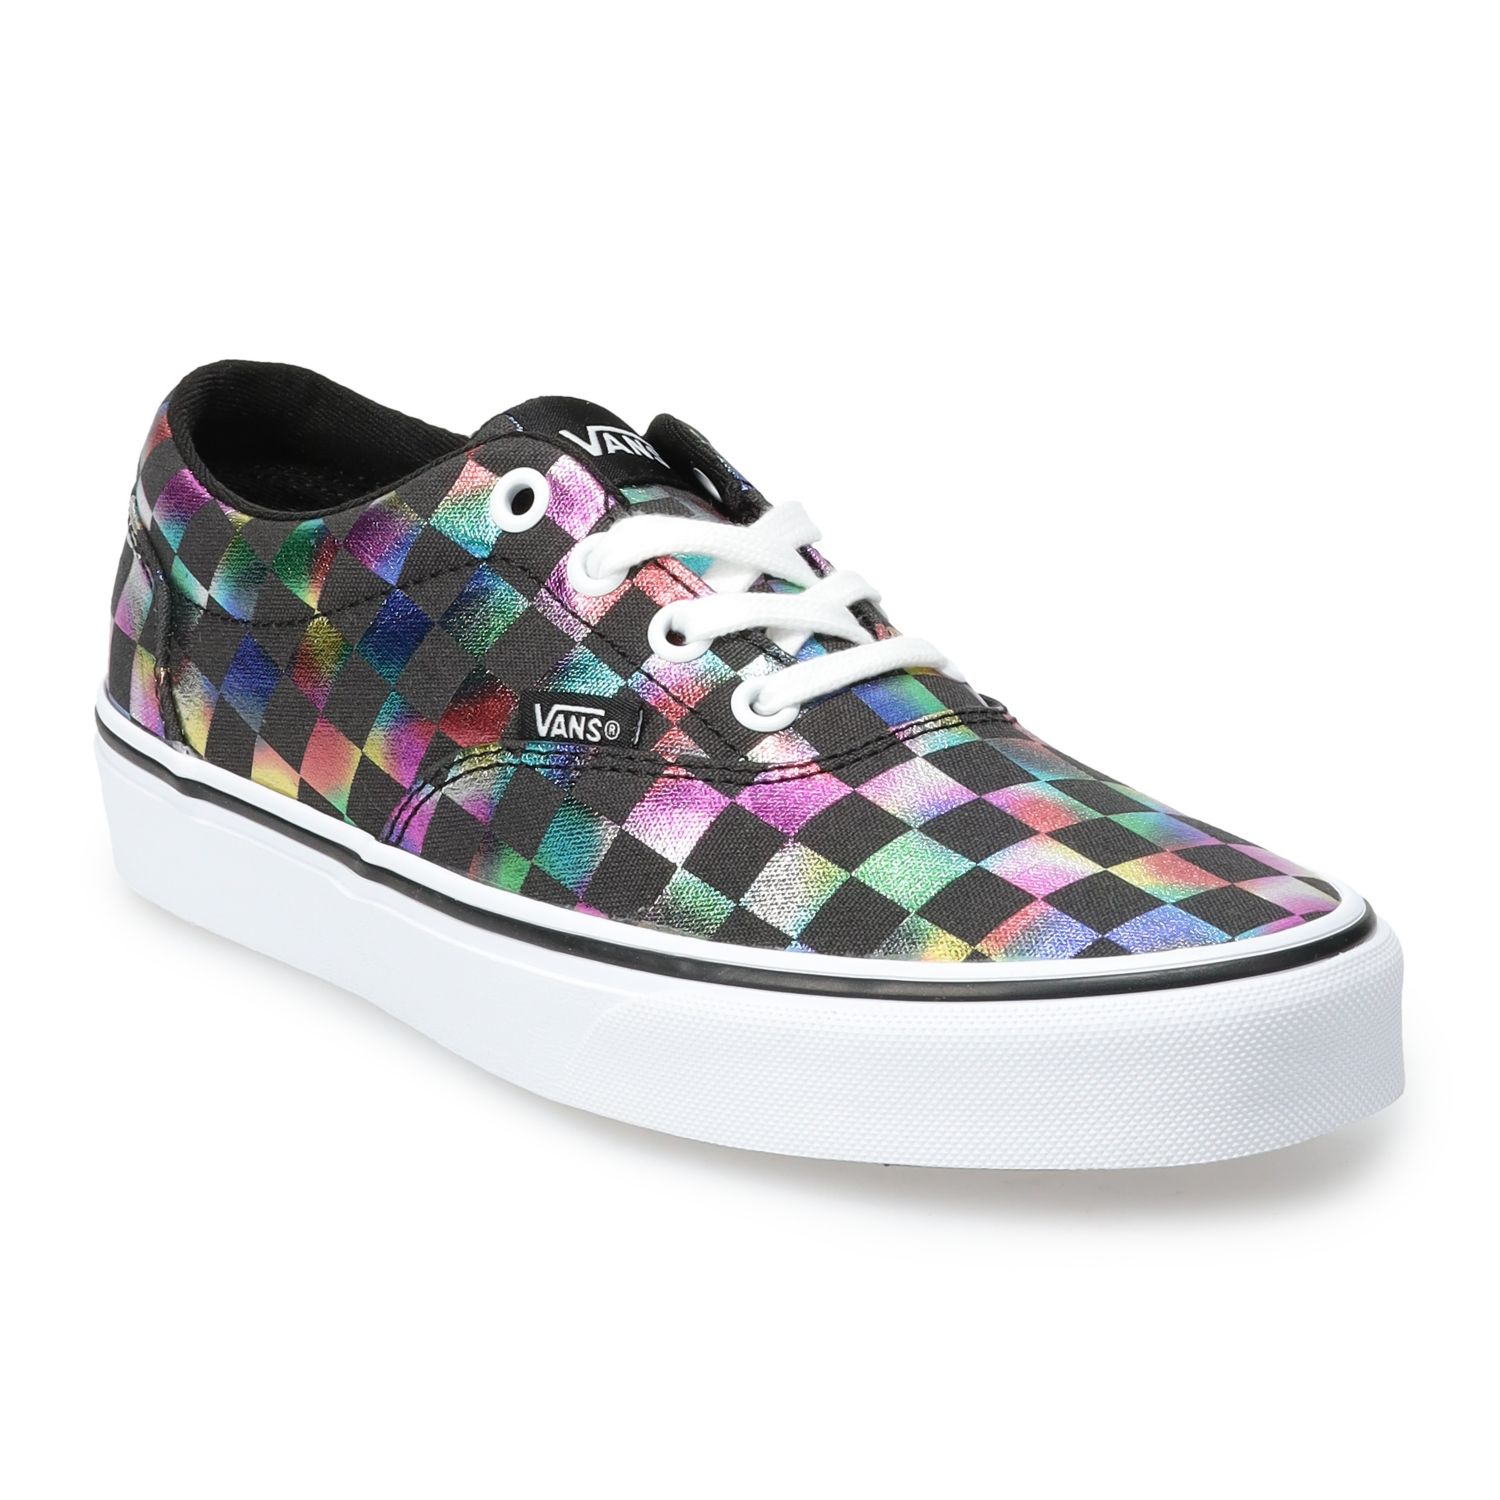 vans doheny shoes womens